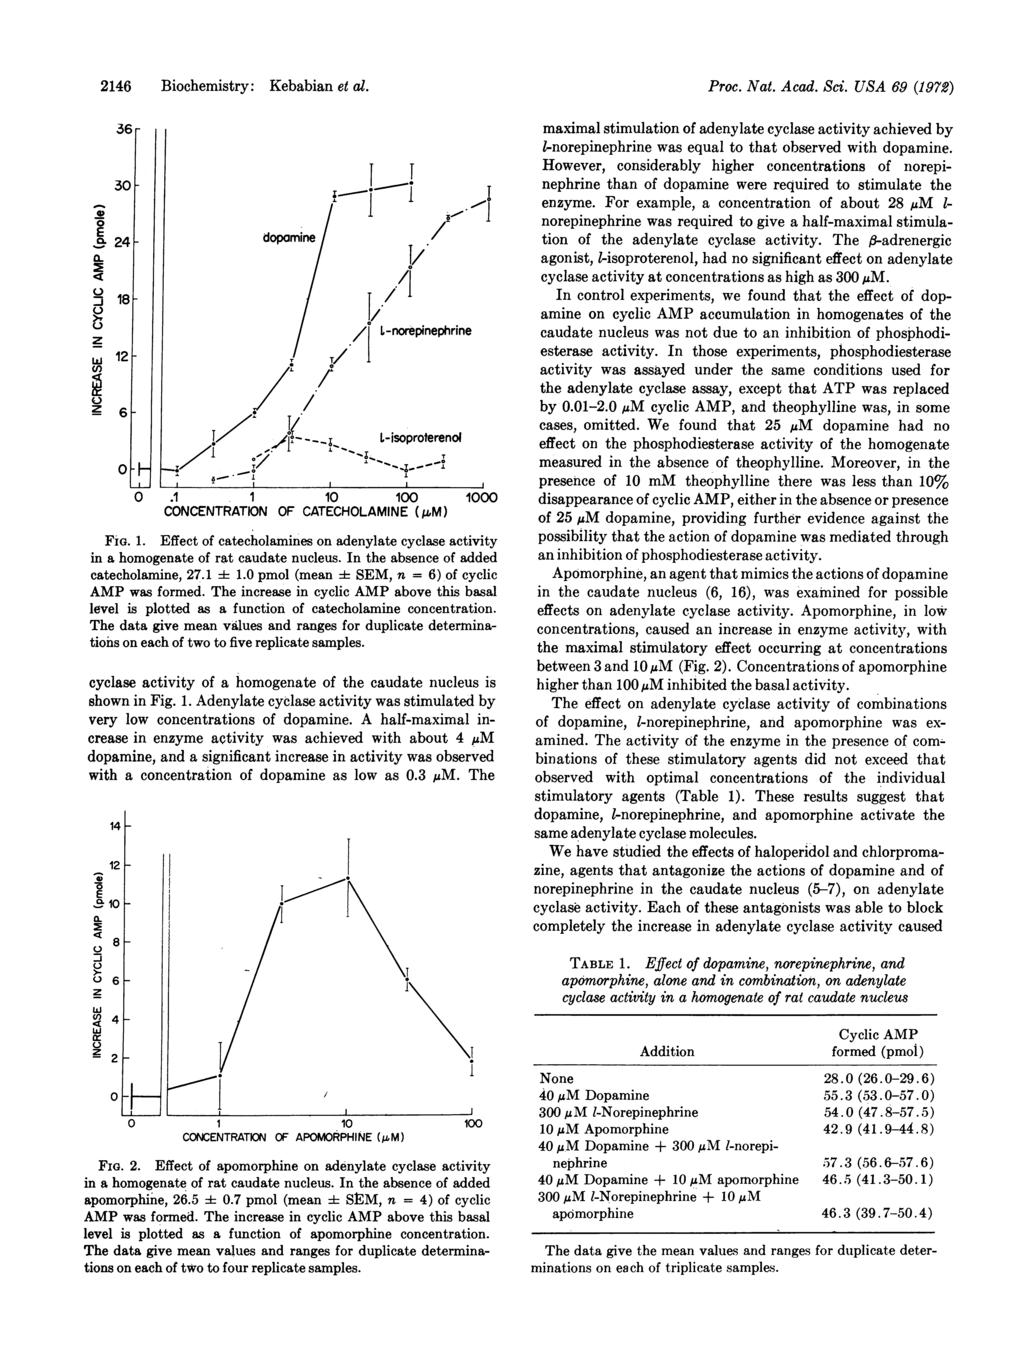 2146 Biochemistry: Kebabian et al. E -..) j w 36r r 3 F 24 F 18F 12 F 6 o dopamine T / / I, I L-noret / Epinephrine,/' I---j L-isoproterenol _- I I.1 1 1 1 CONCENTRATION OF CATECHOLAMINE (pm) FiG. 1. Effect of catecholamines on adenylate cyclase activity in a homogenate of rat caudate nucleus.